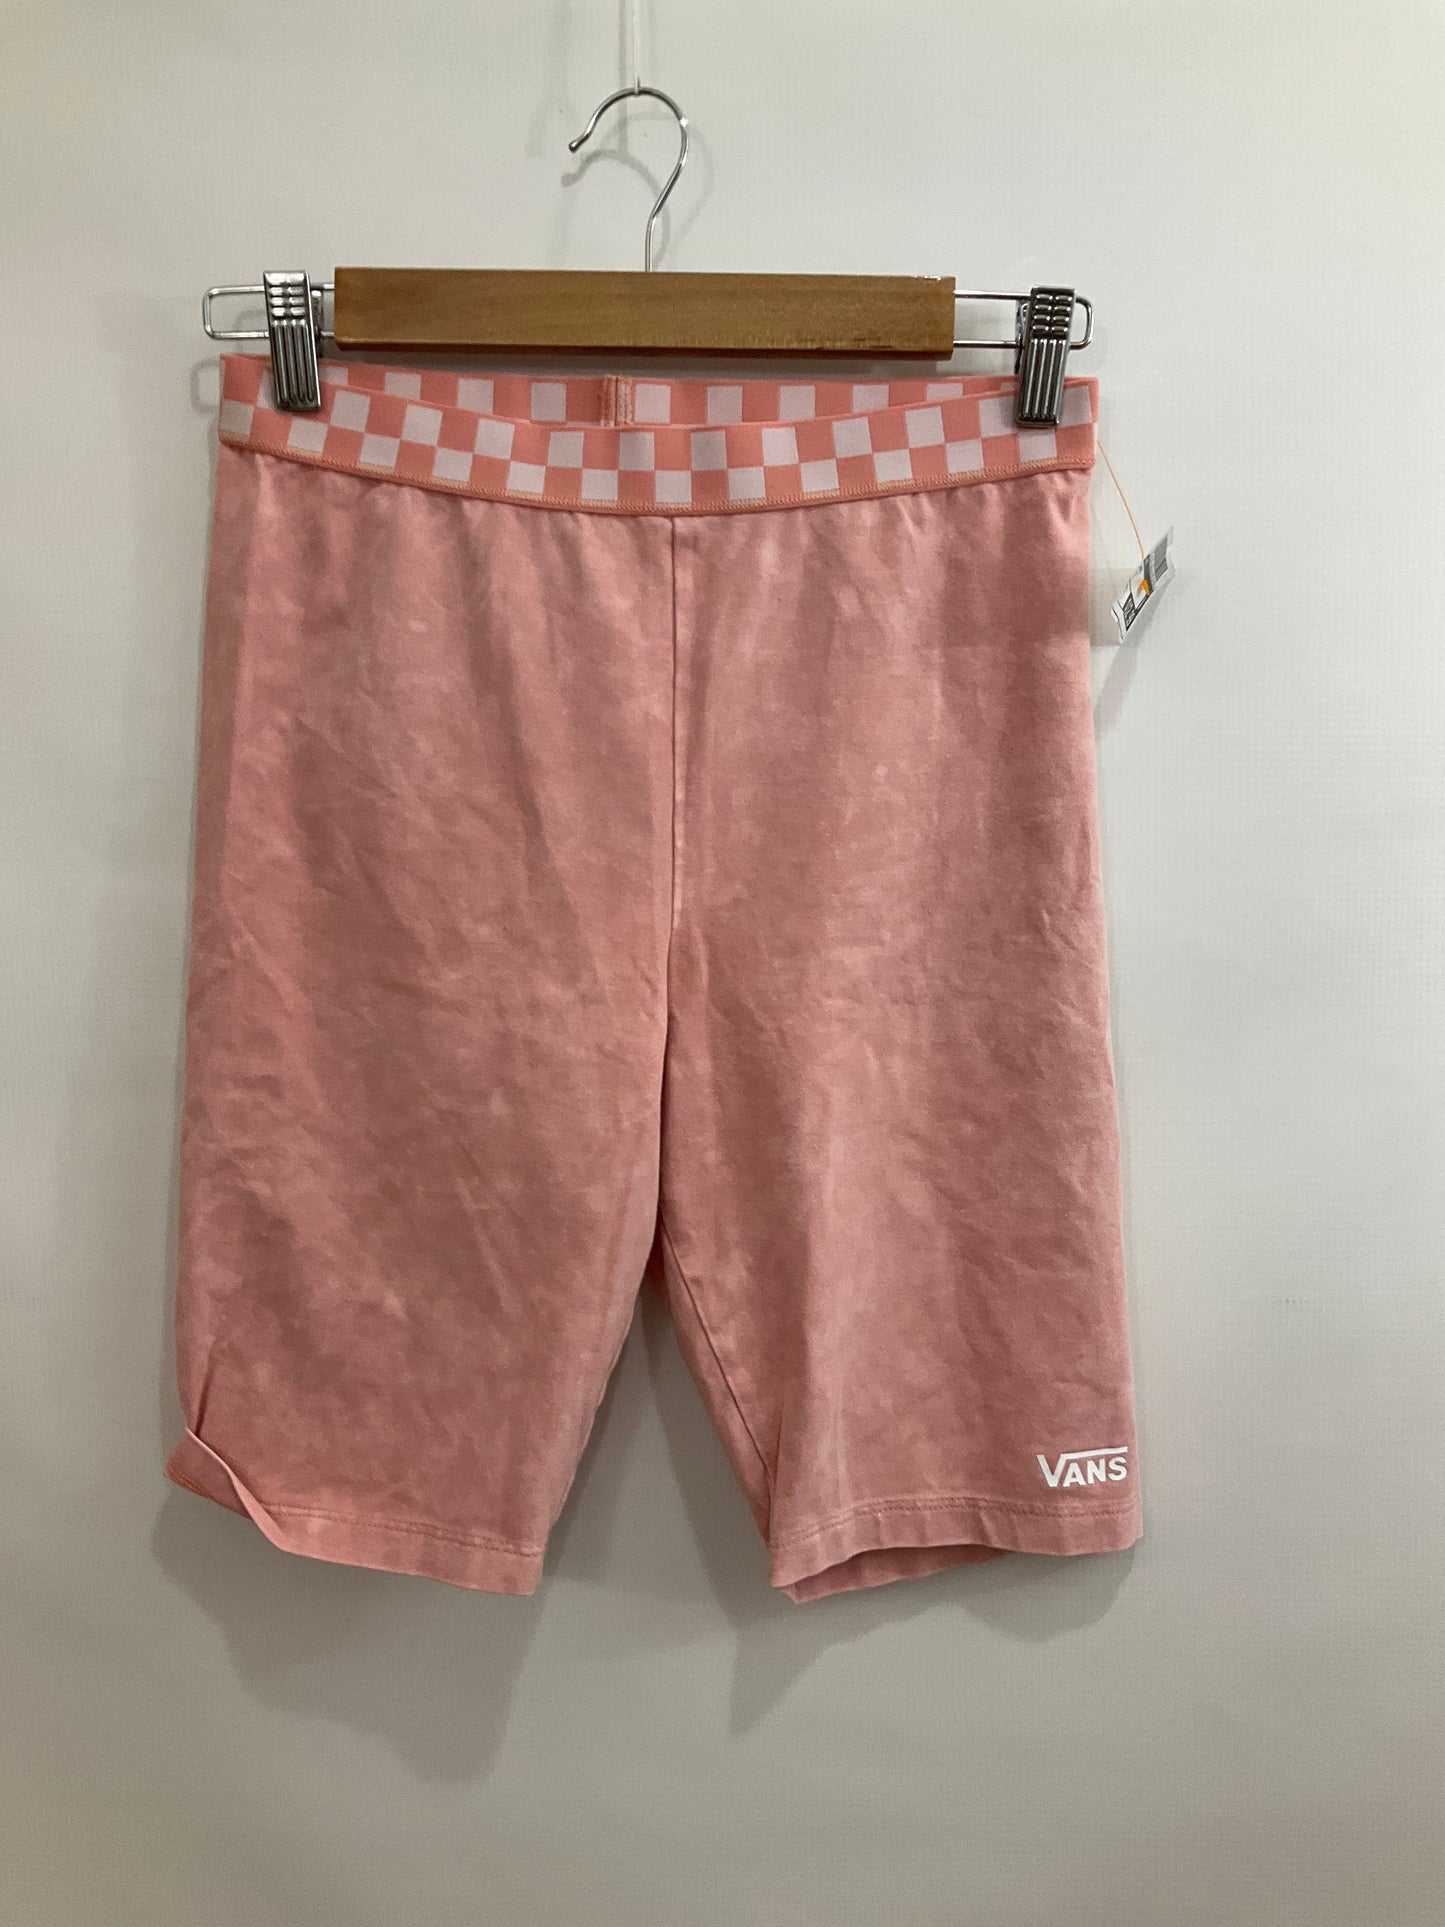 Shorts By Vans  Size: M